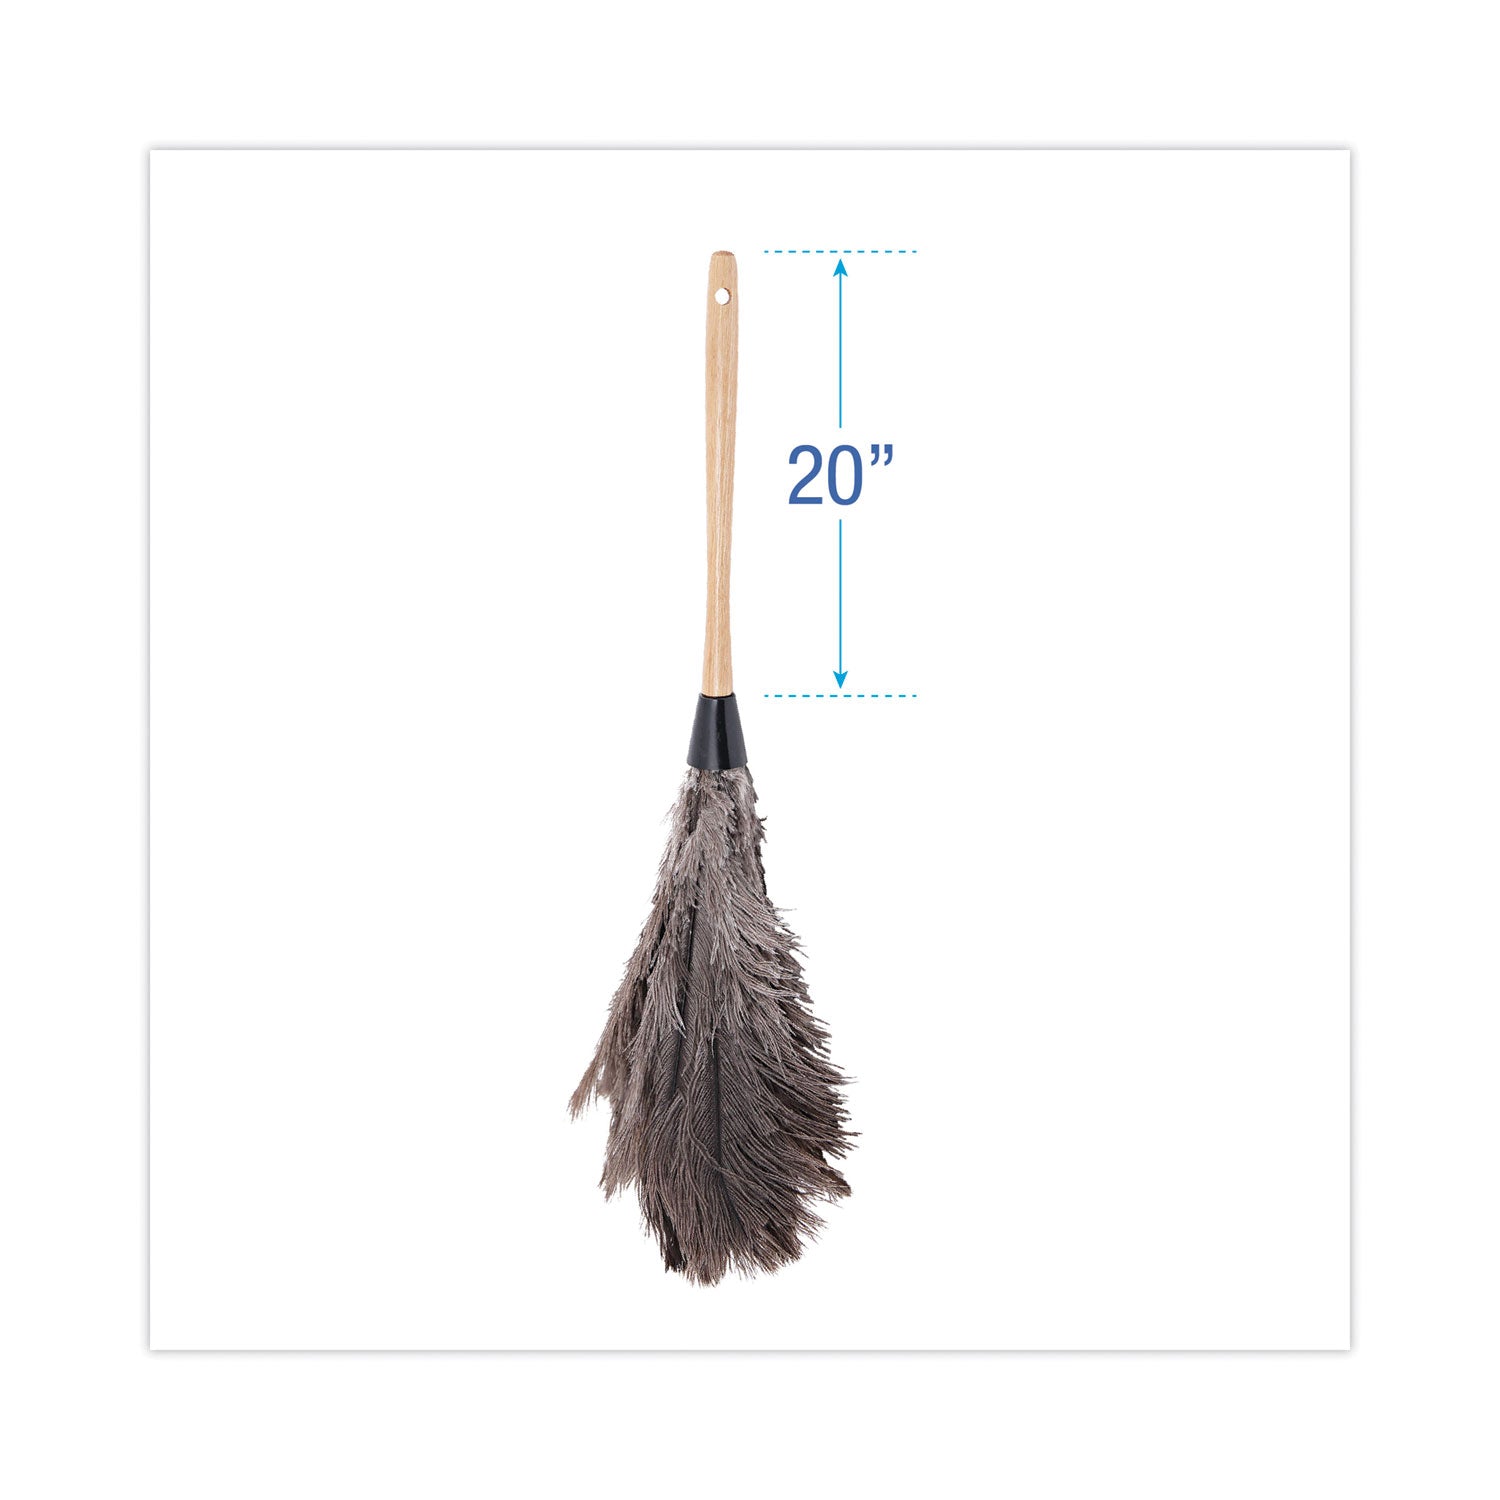 professional-ostrich-feather-duster-wood-handle-20_bwk20gy - 2